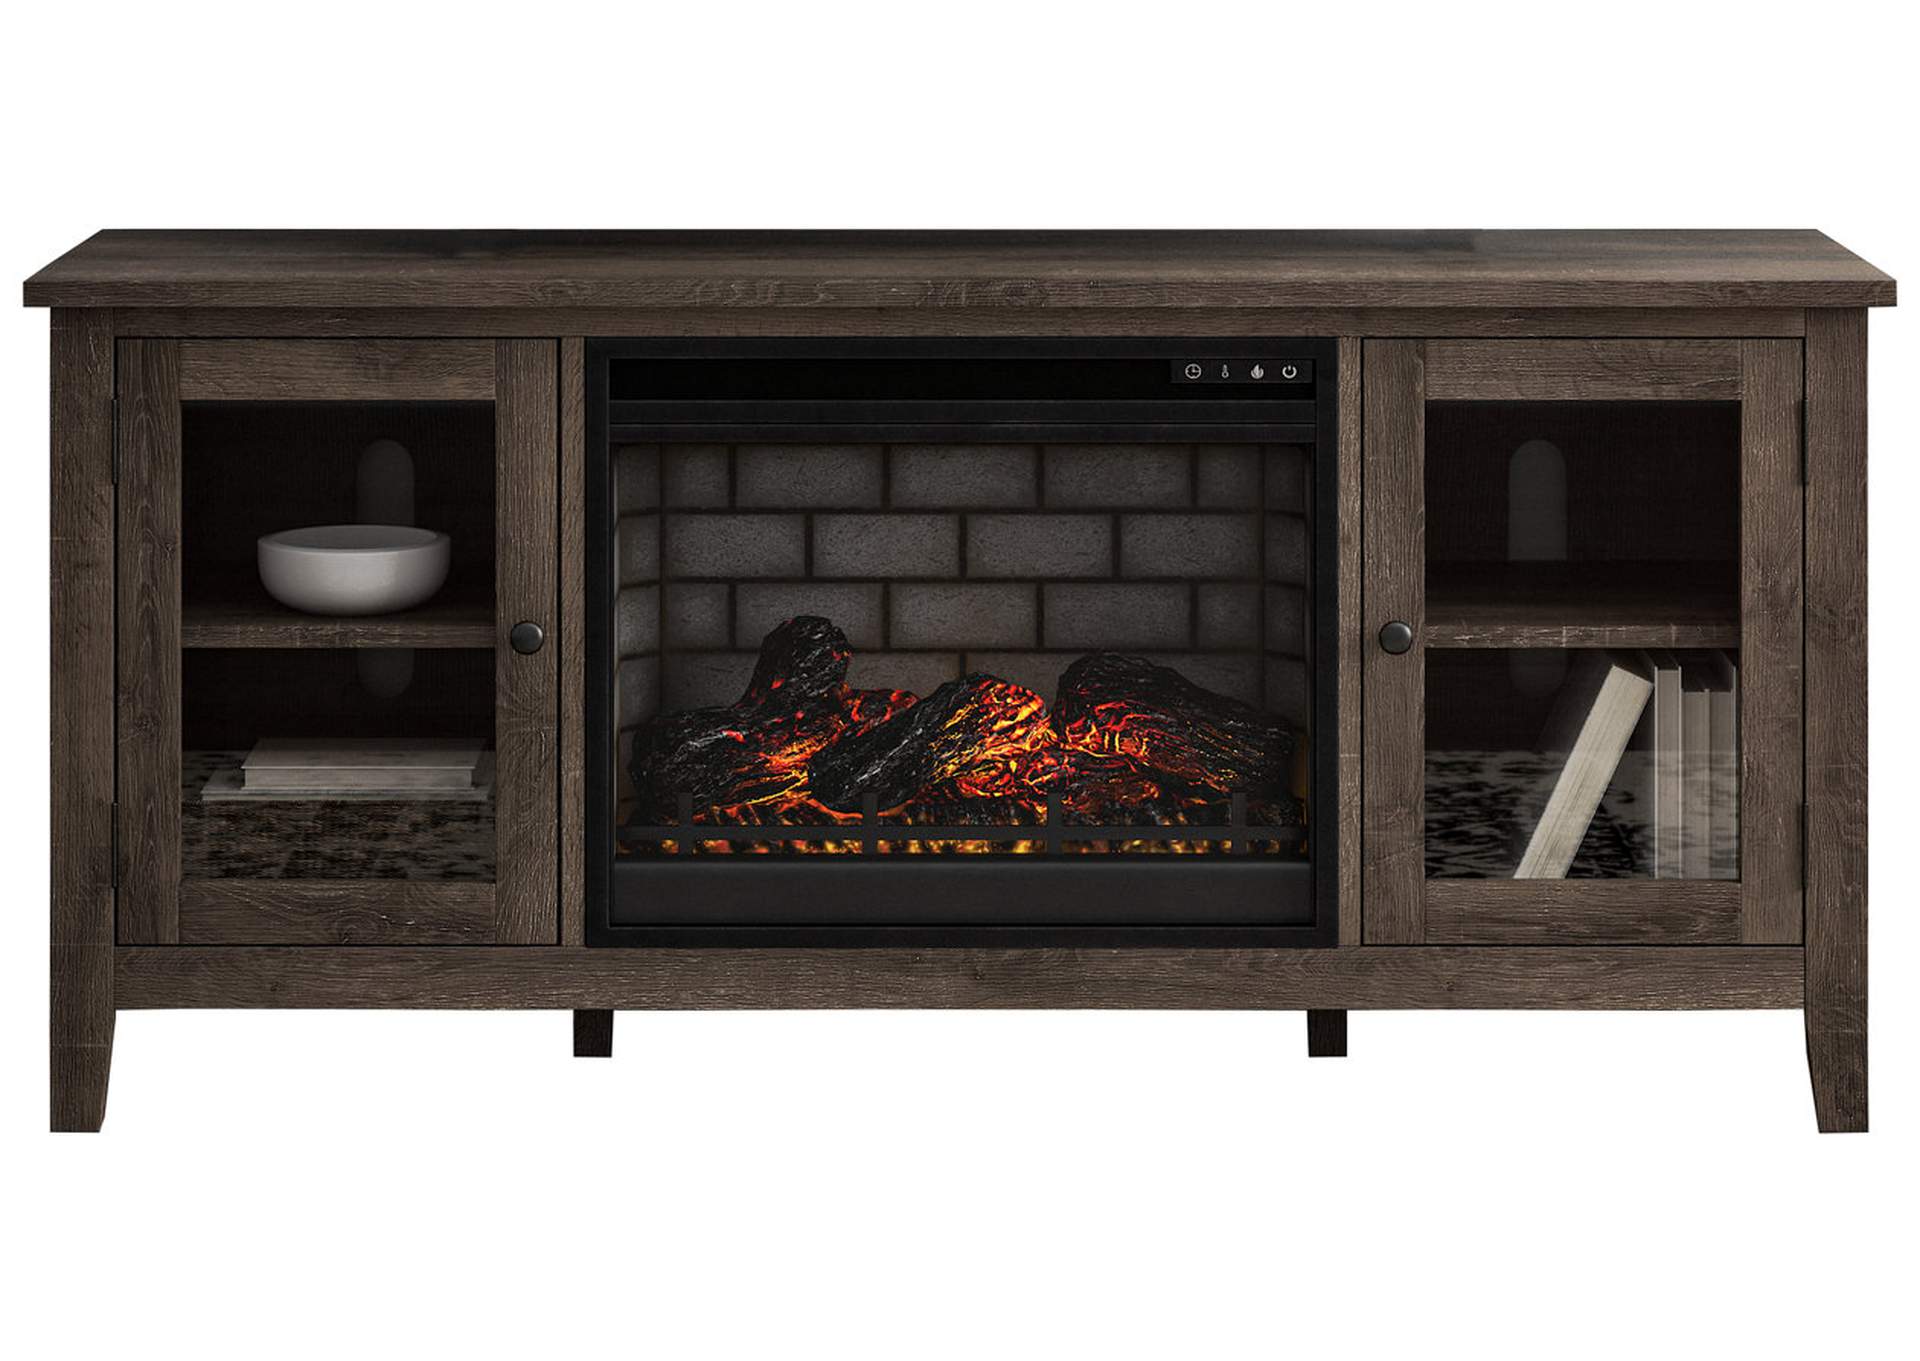 Arlenbry 60" TV Stand with Electric Fireplace,Signature Design By Ashley